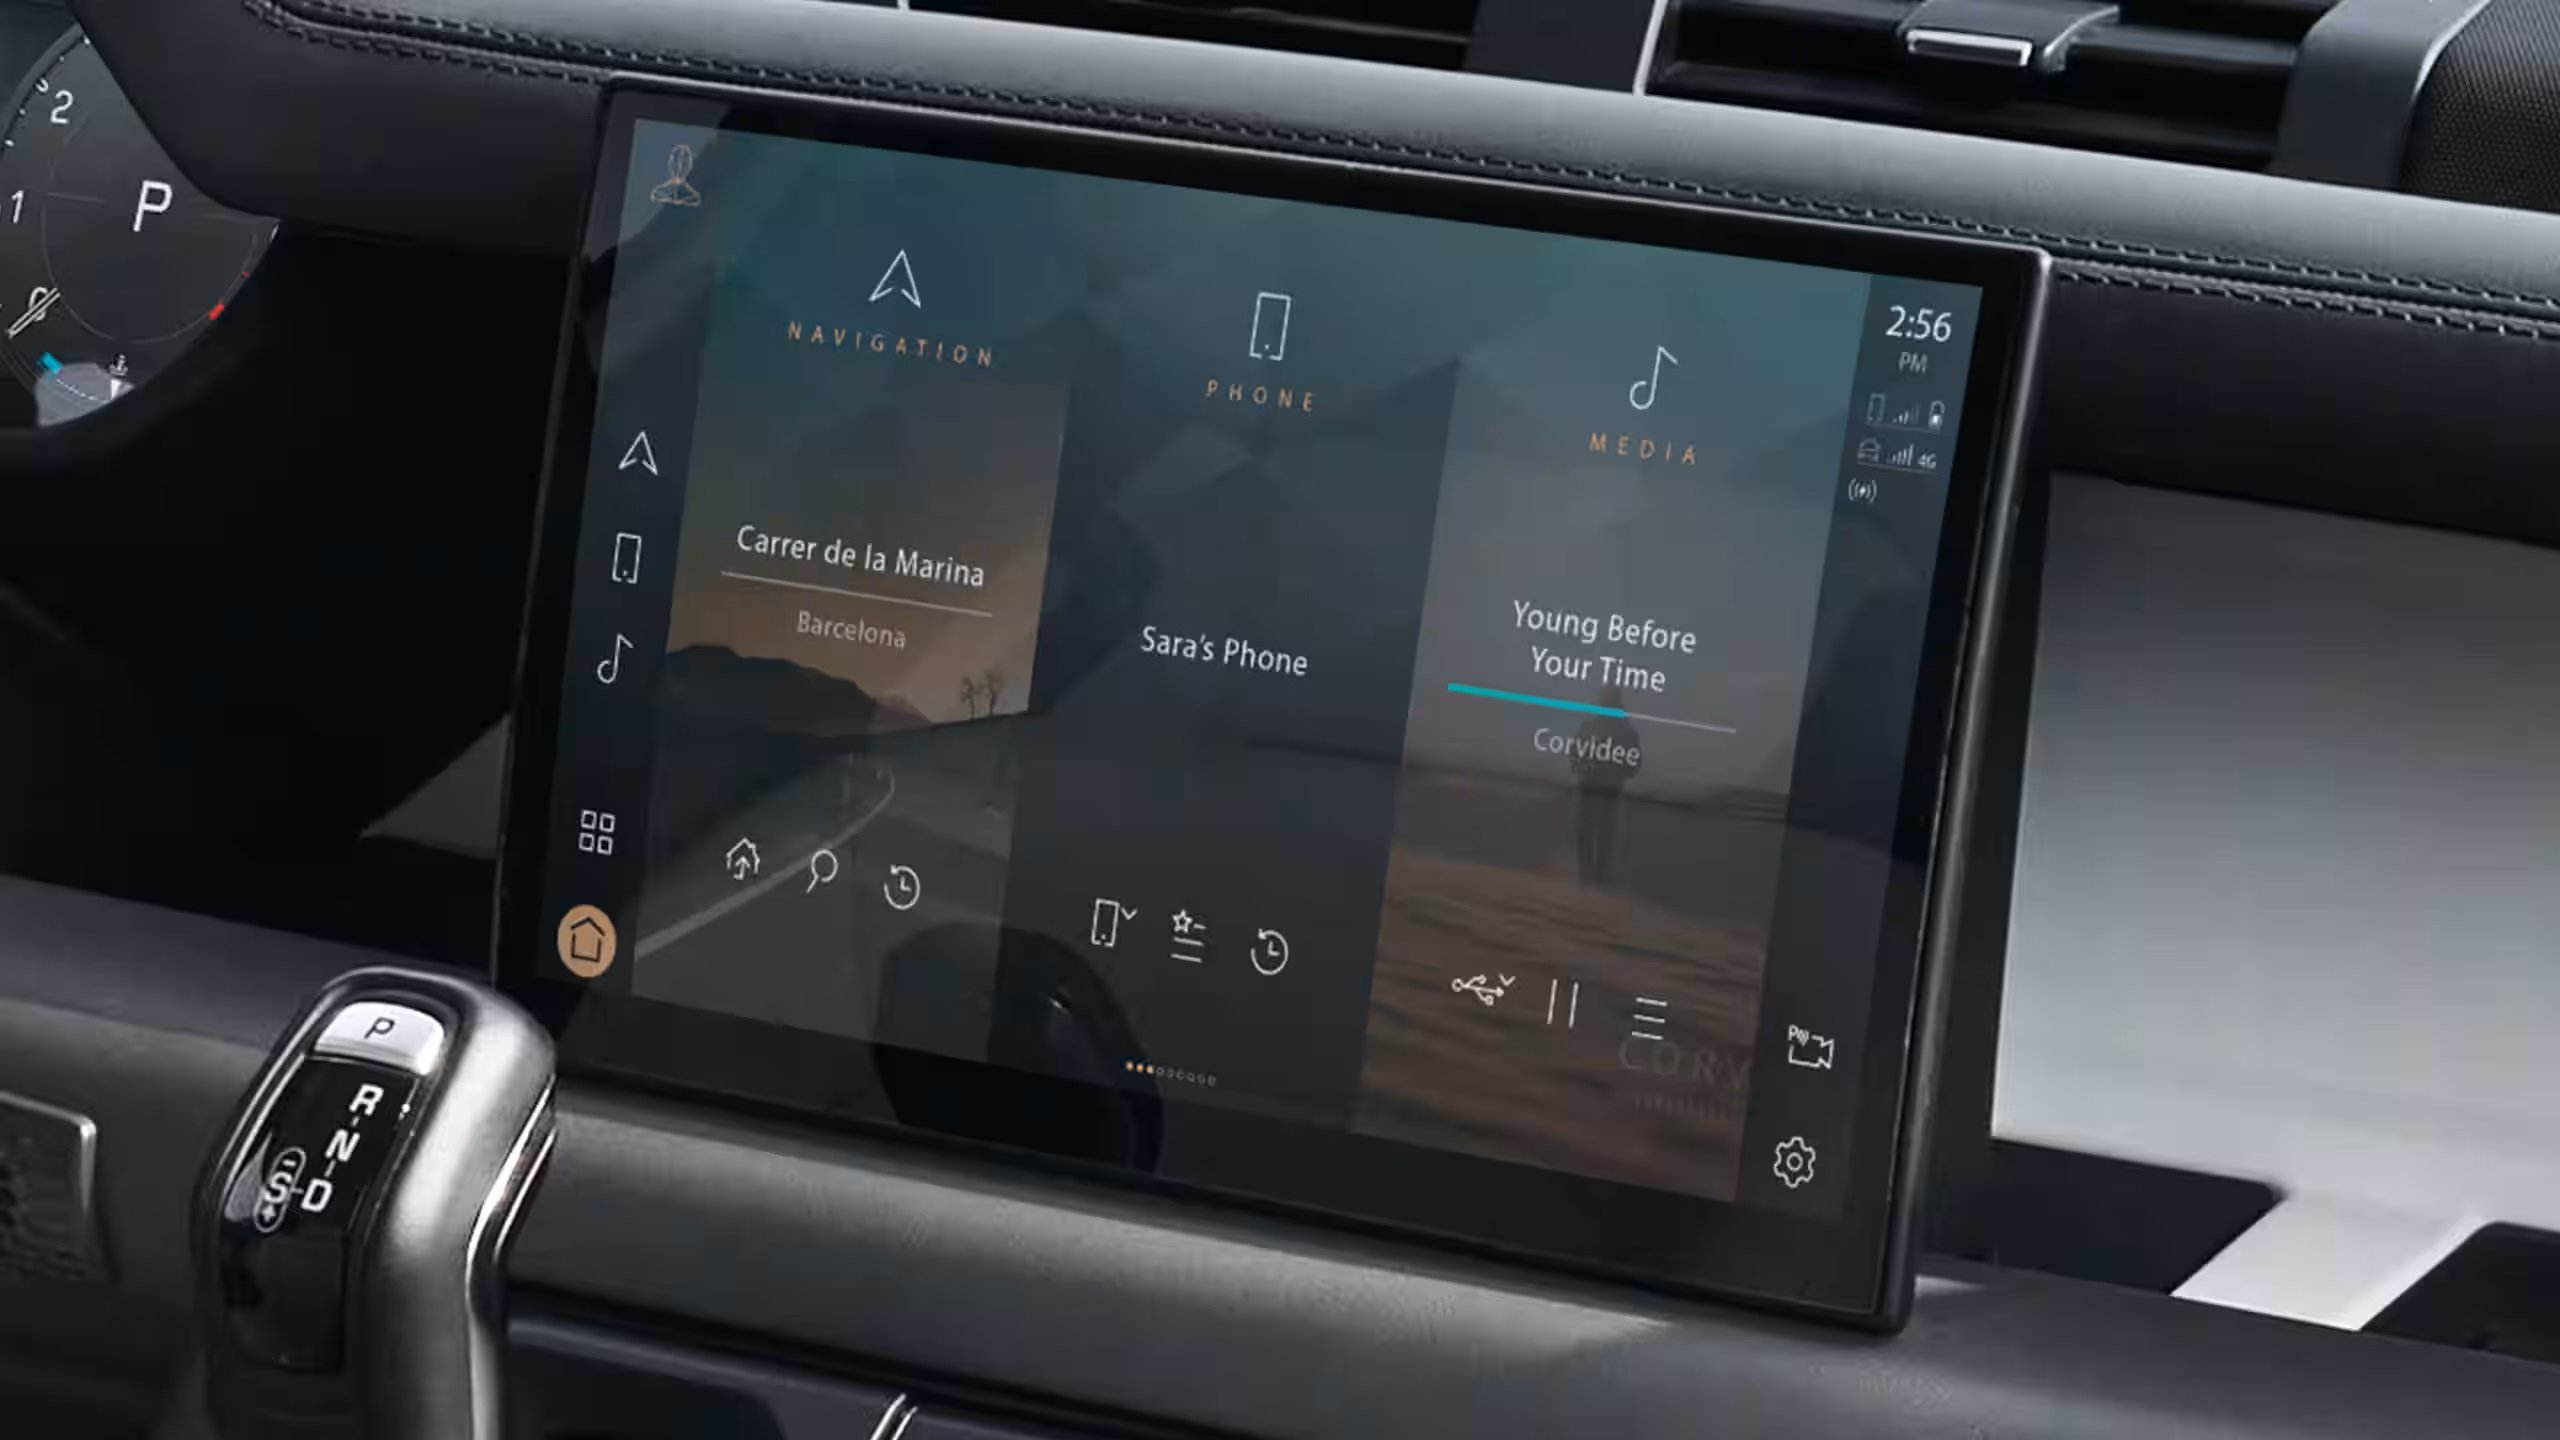 Infotainment touch screen display